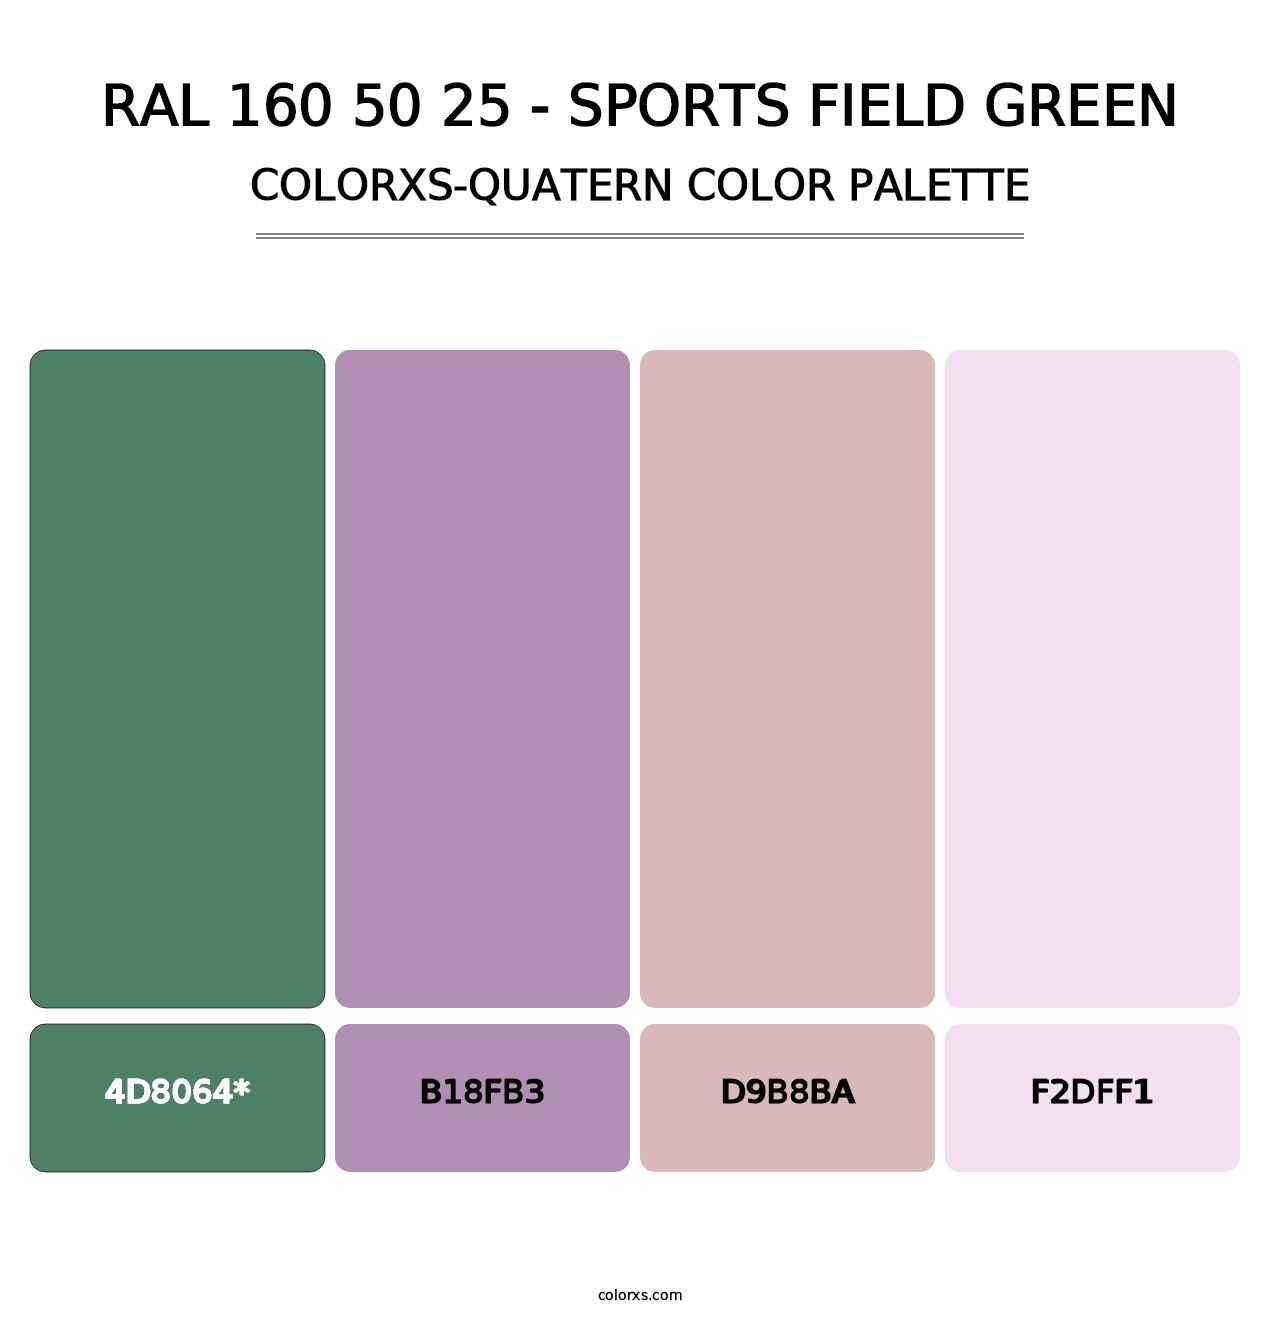 RAL 160 50 25 - Sports Field Green - Colorxs Quatern Palette